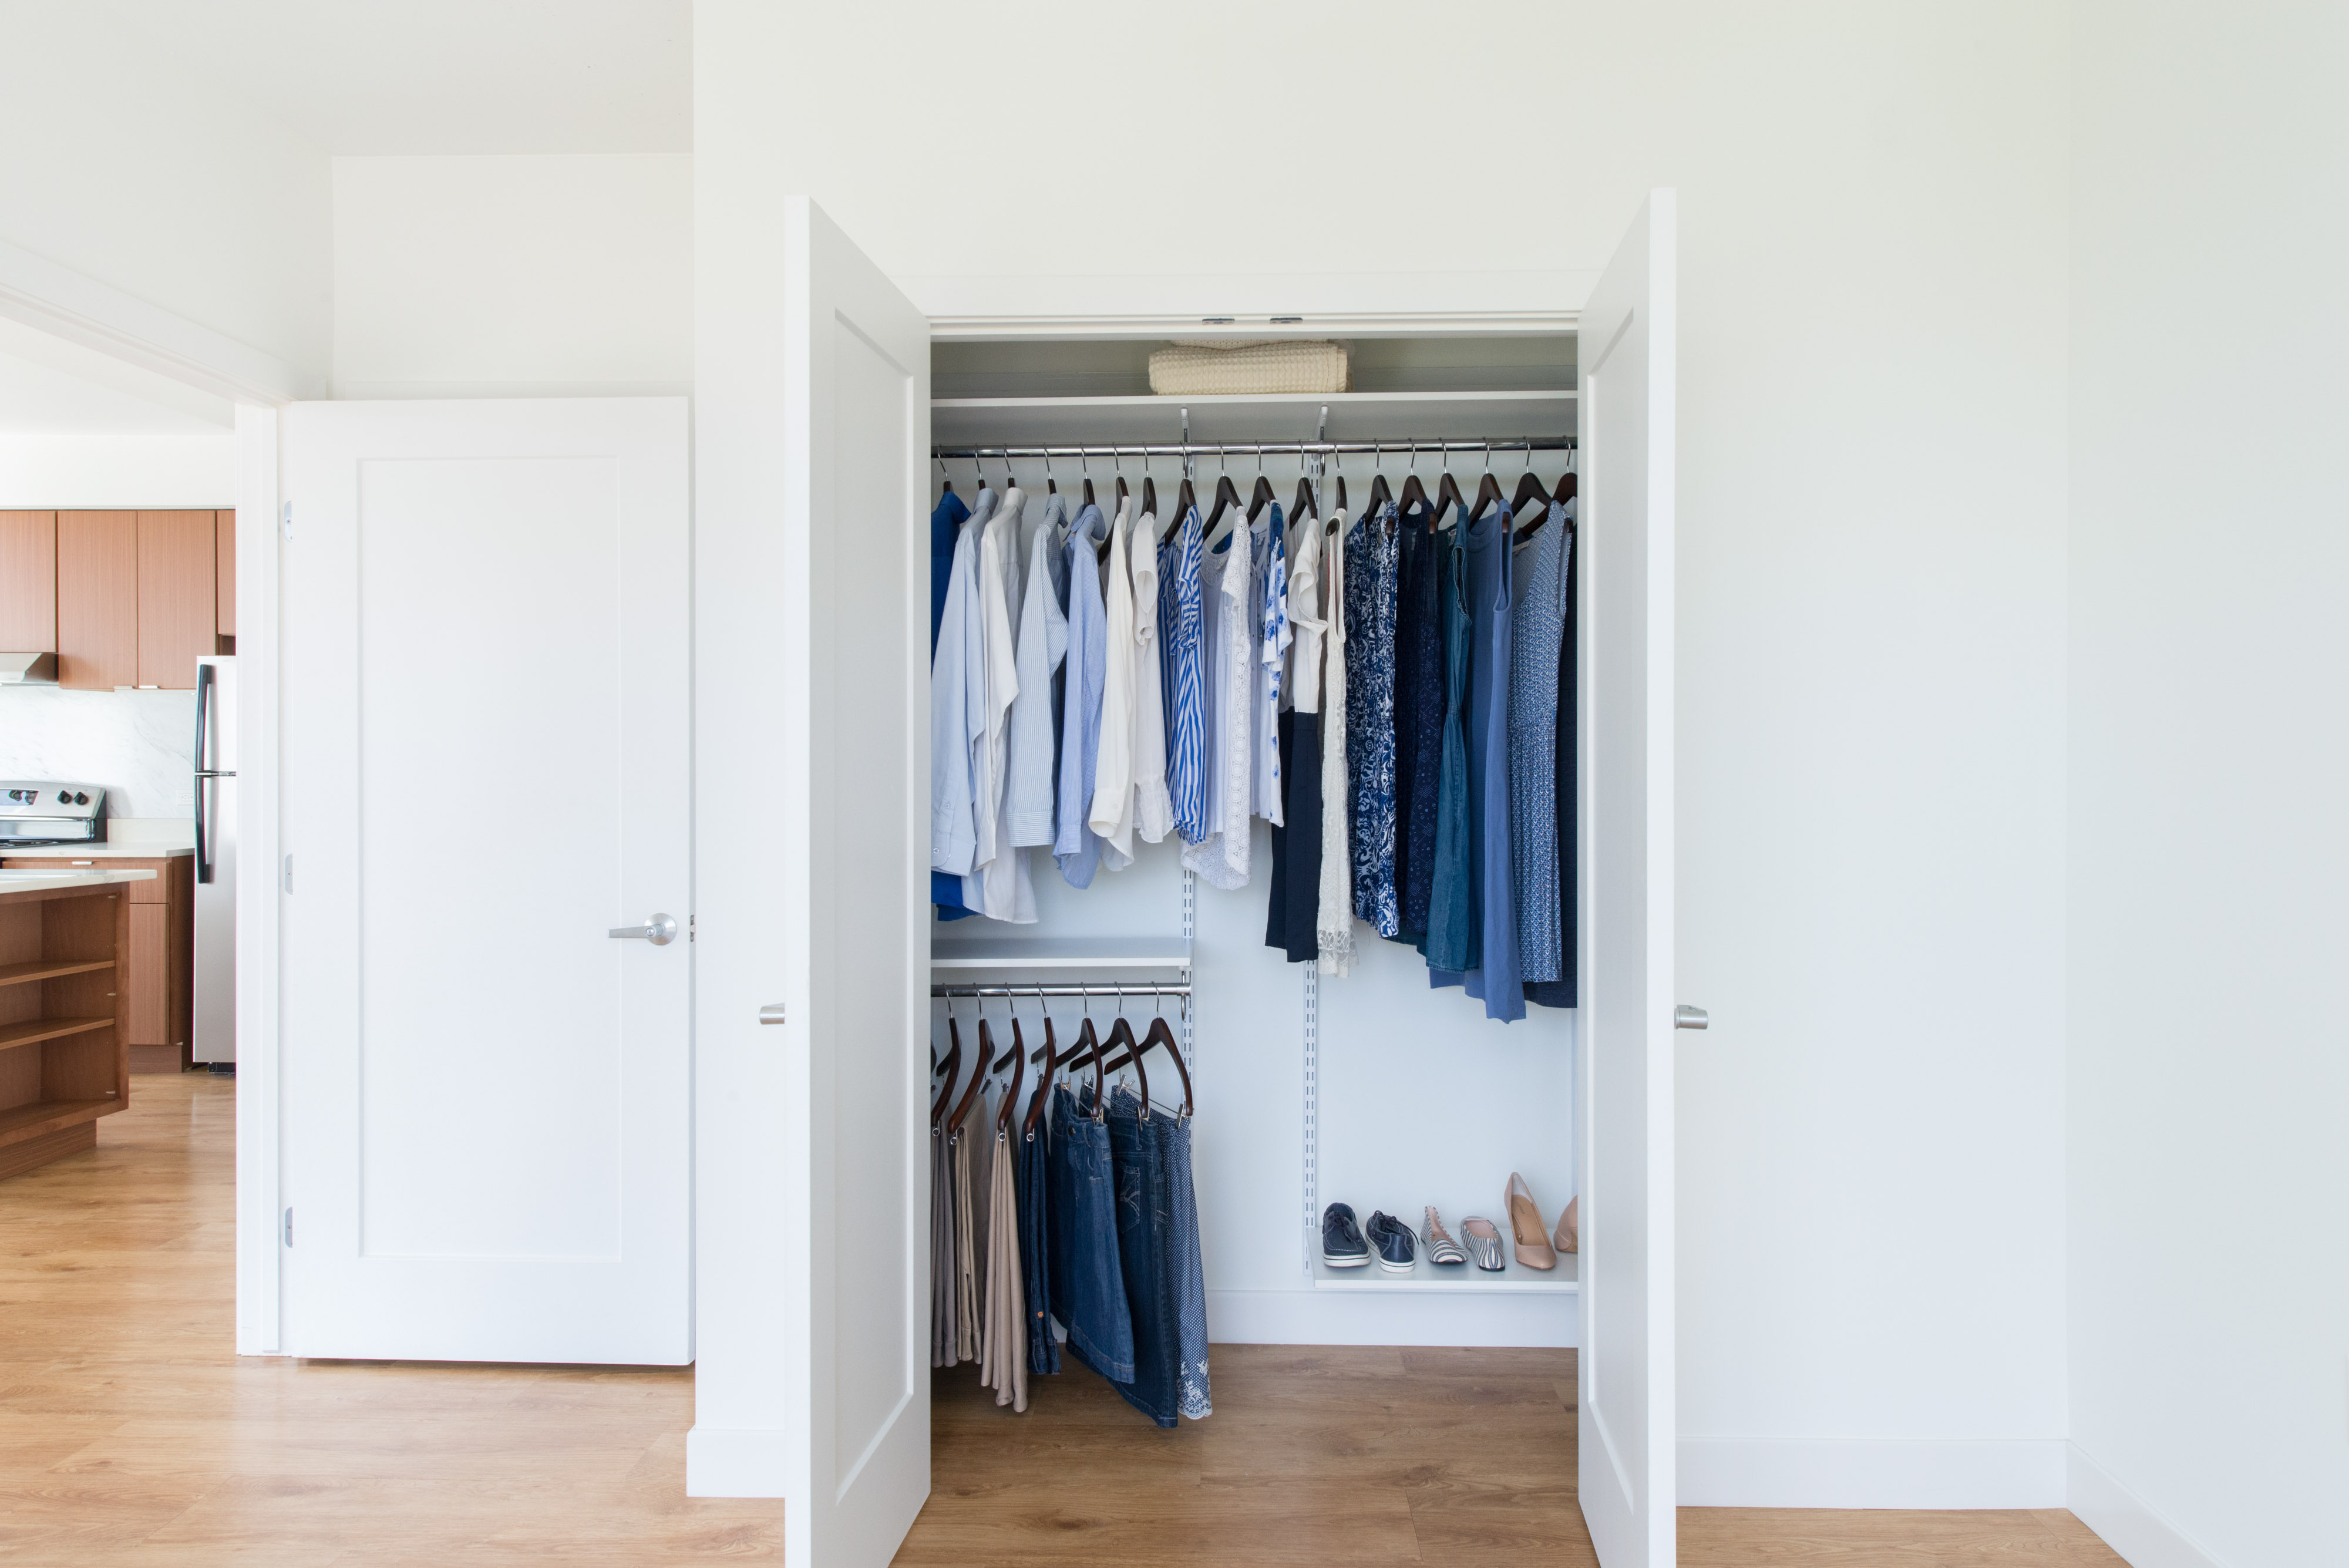 freedomRail Reach-in Closet in White with clothing inside an apartment.